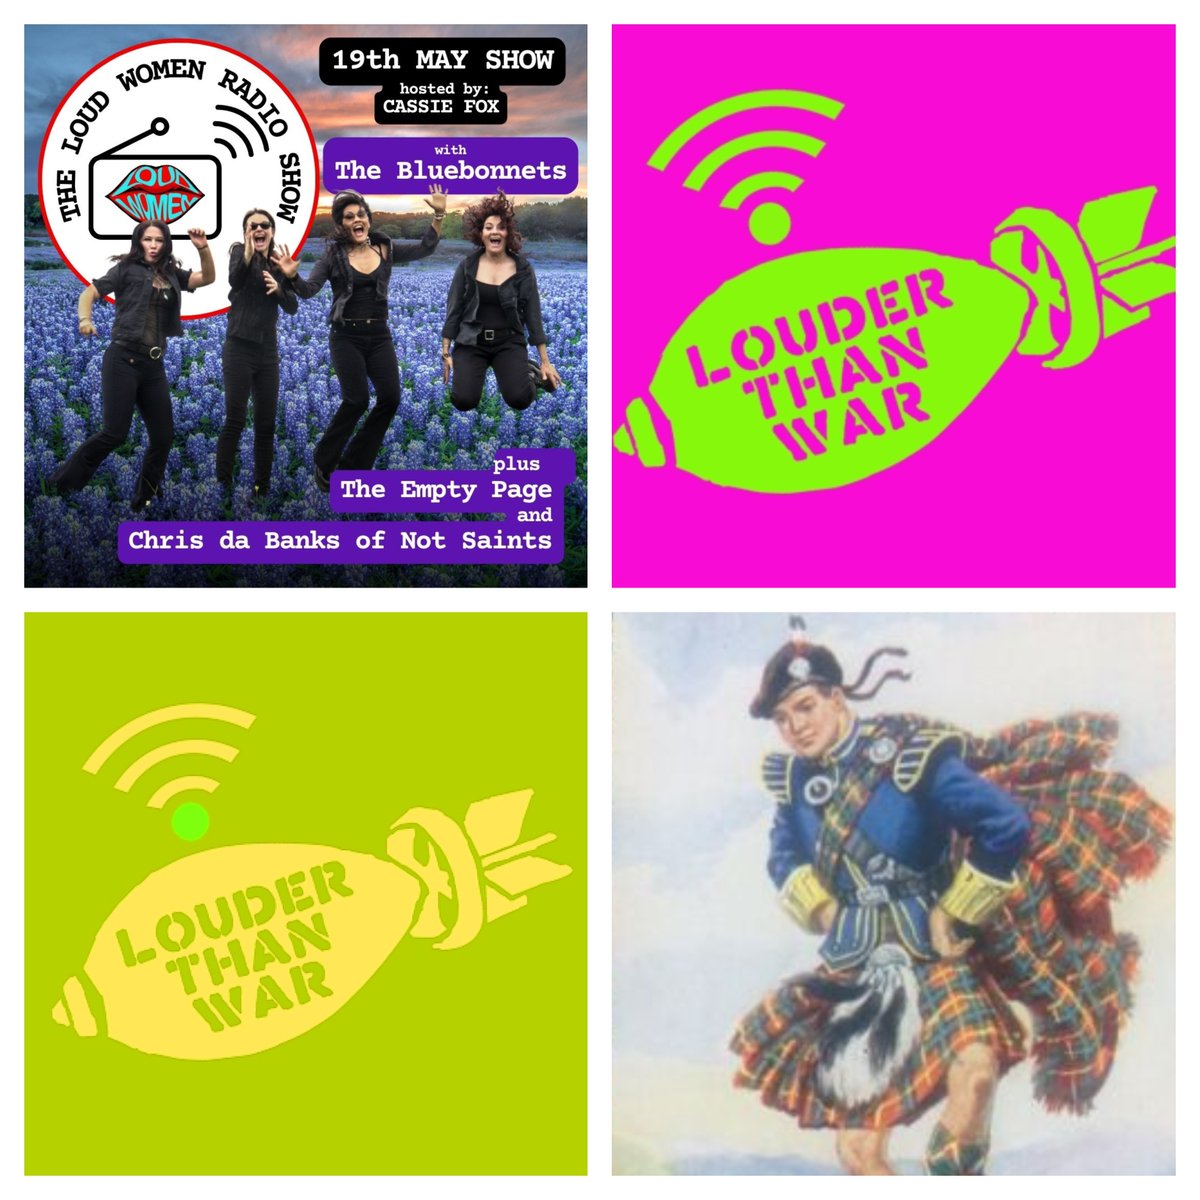 Today on Louder Than War Radio! s2.radio.co/sab795a38d/lis…
5pm — The LOUD WOMEN Show — Catch up with a REPLAY of last week's show! @loudwomenclub 
7pm — Global Sounds with WorldCelt @talkinggigs